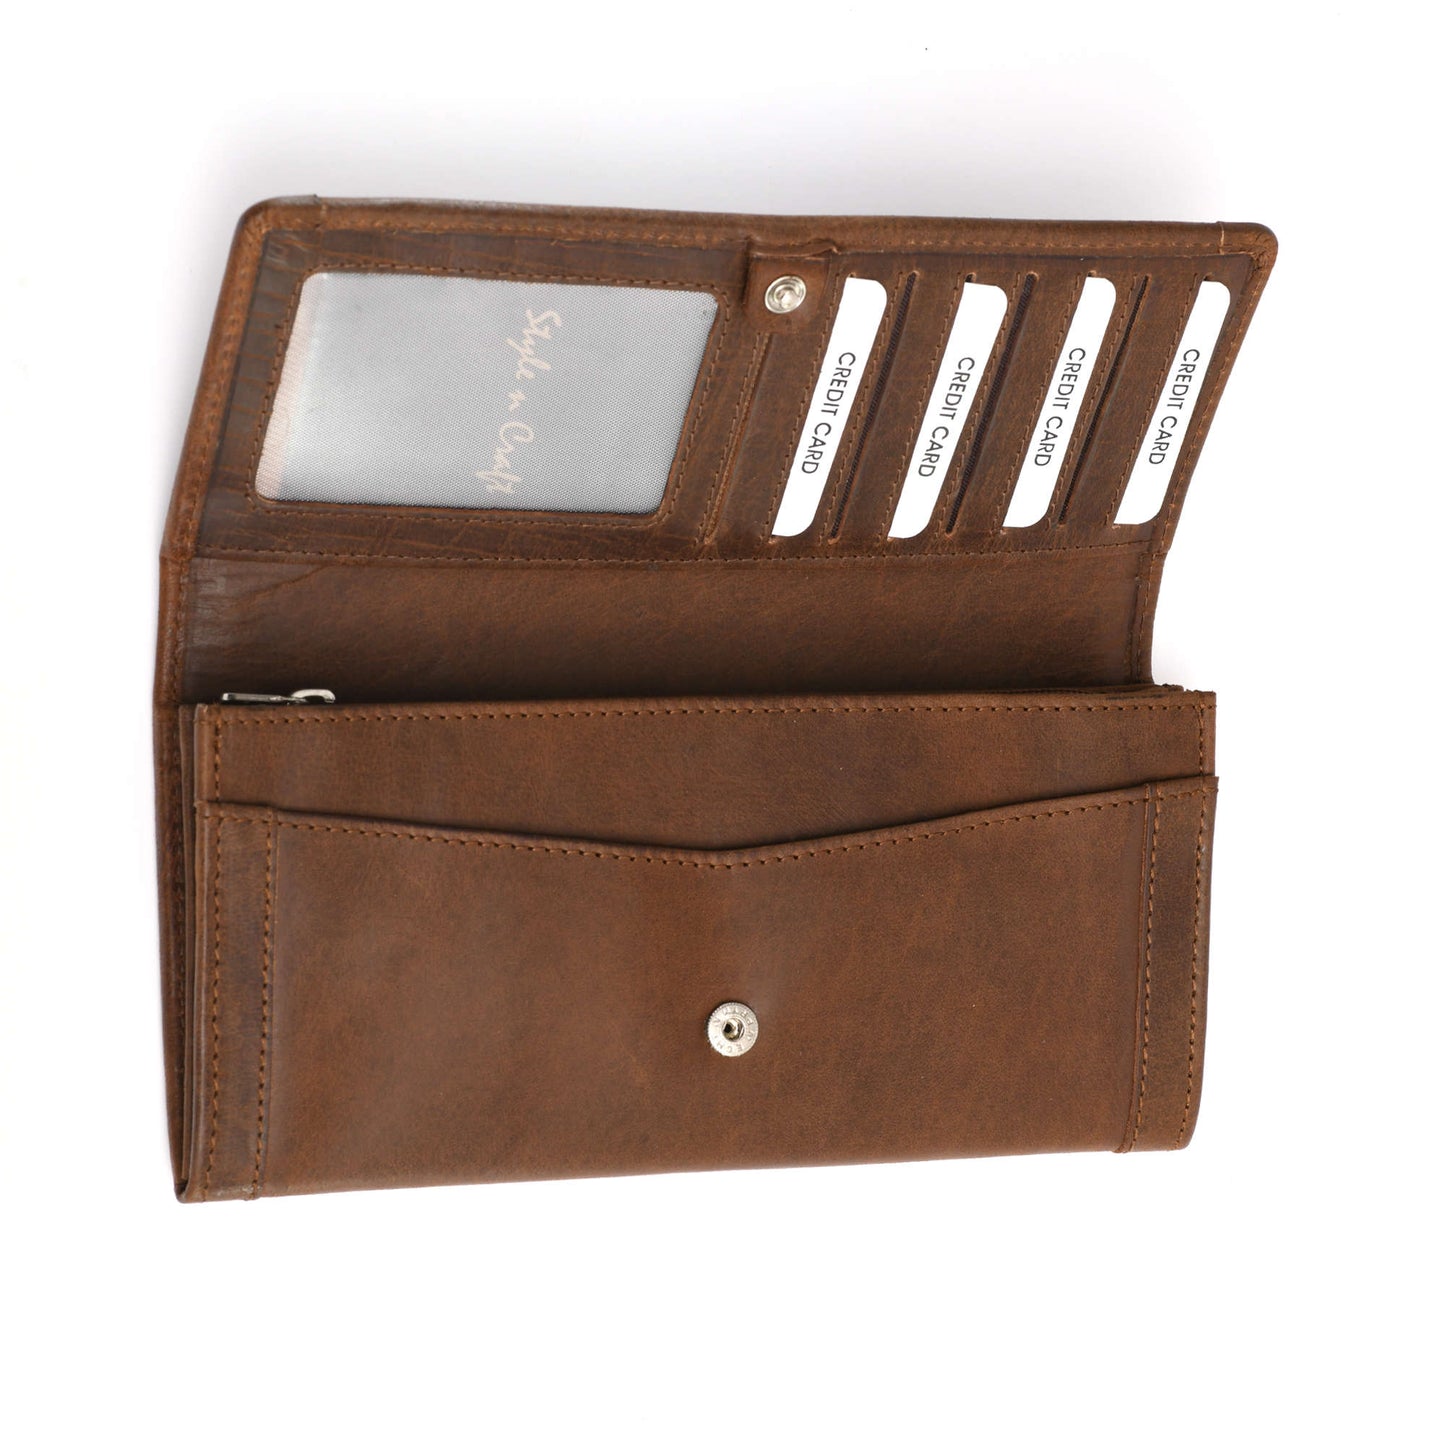 Style n Craft 391106 Ladies Long Clutch Wallet in Oak Color Leather with a Leather Frame on the Outside - Open View 2